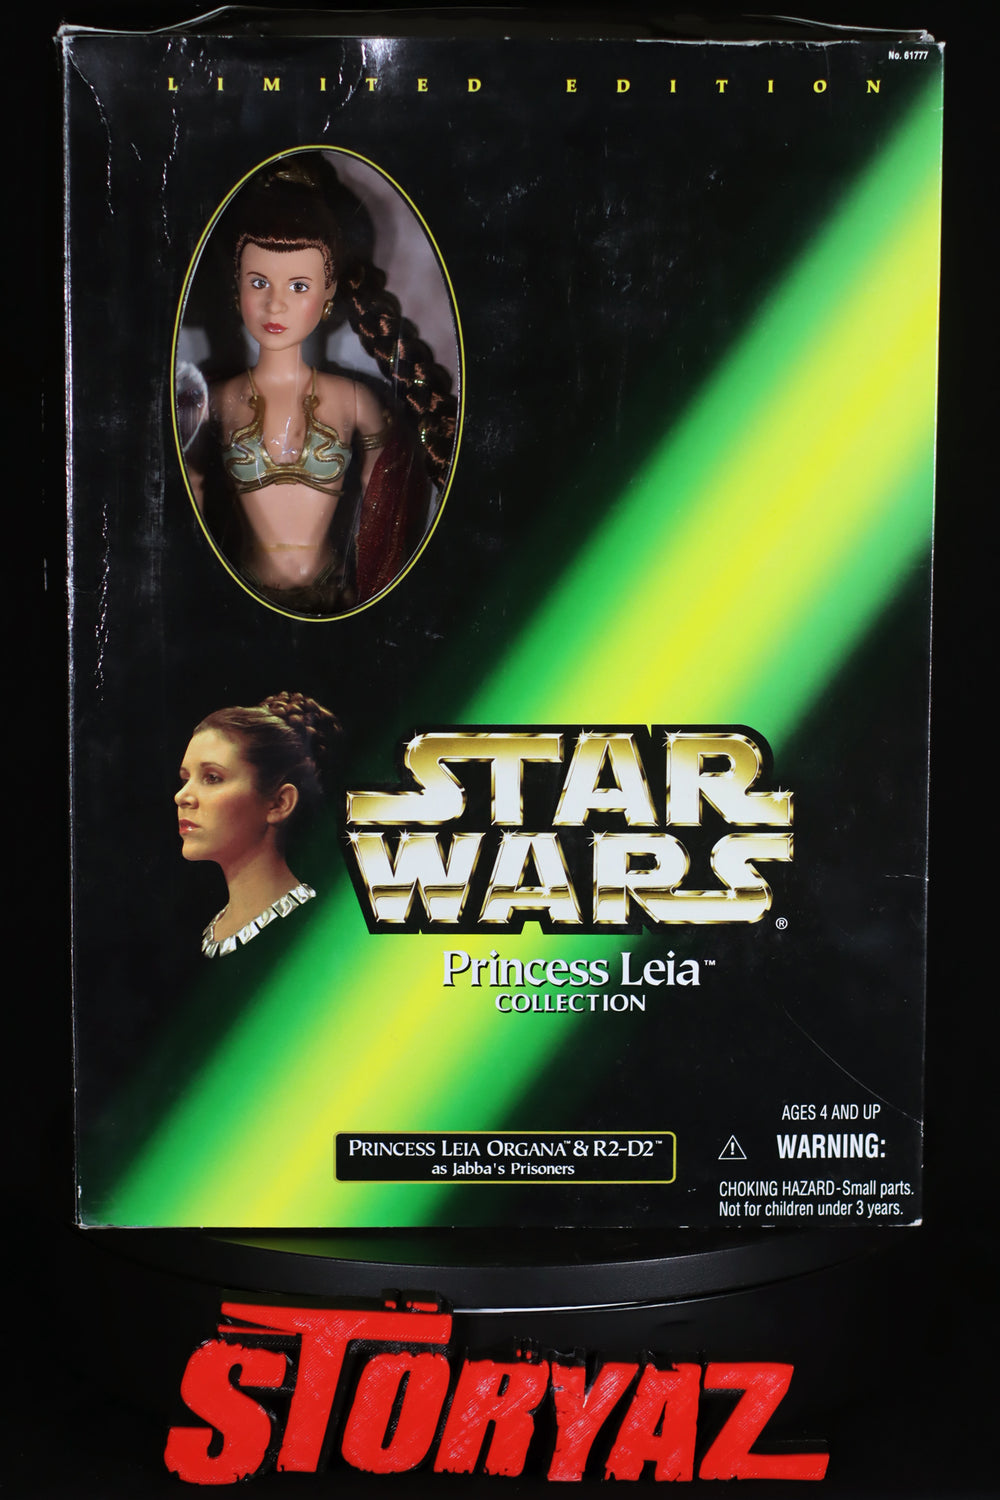 Star Wars: "Princess Leia Organa and R2-D2 as Jabba's Prisioners" 12" Limited Edition